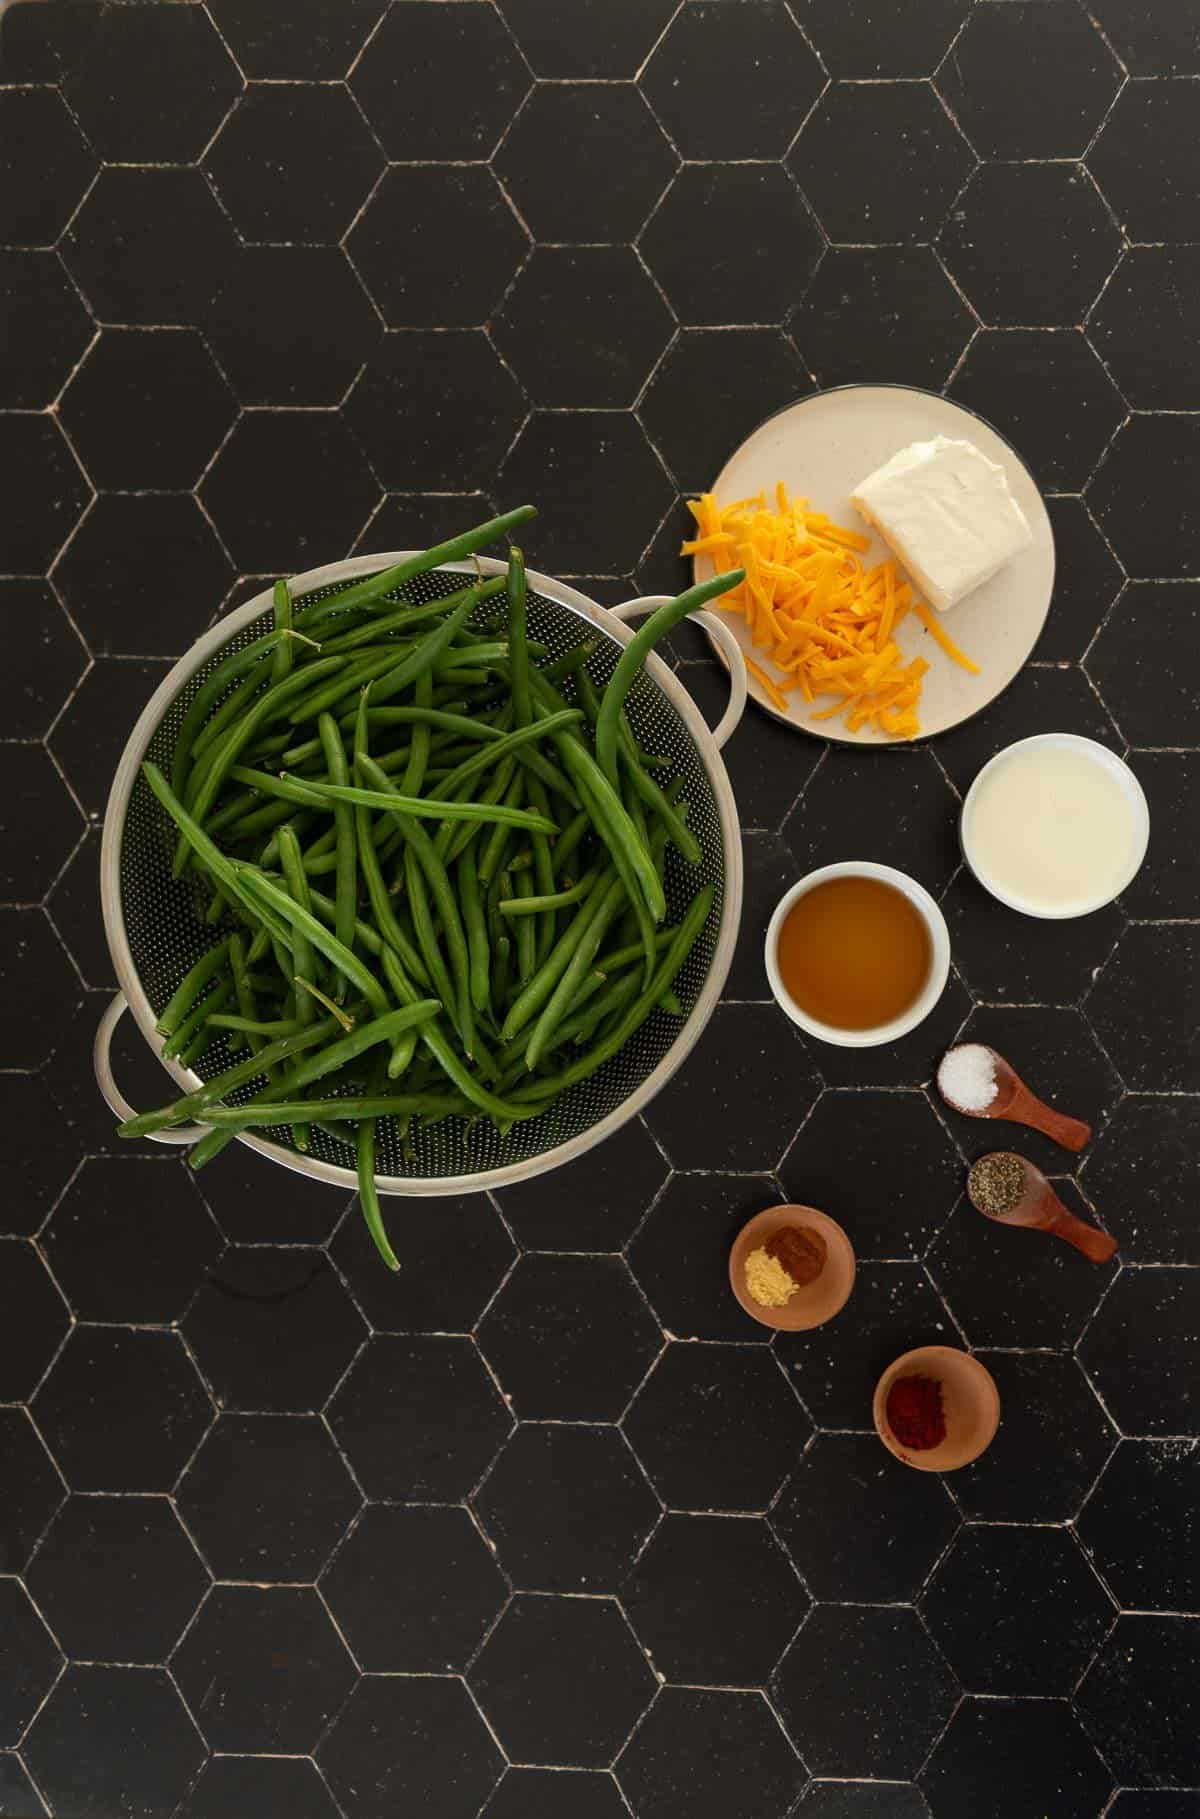 A bowl of green beans, cheese, and other ingredients on a black table.